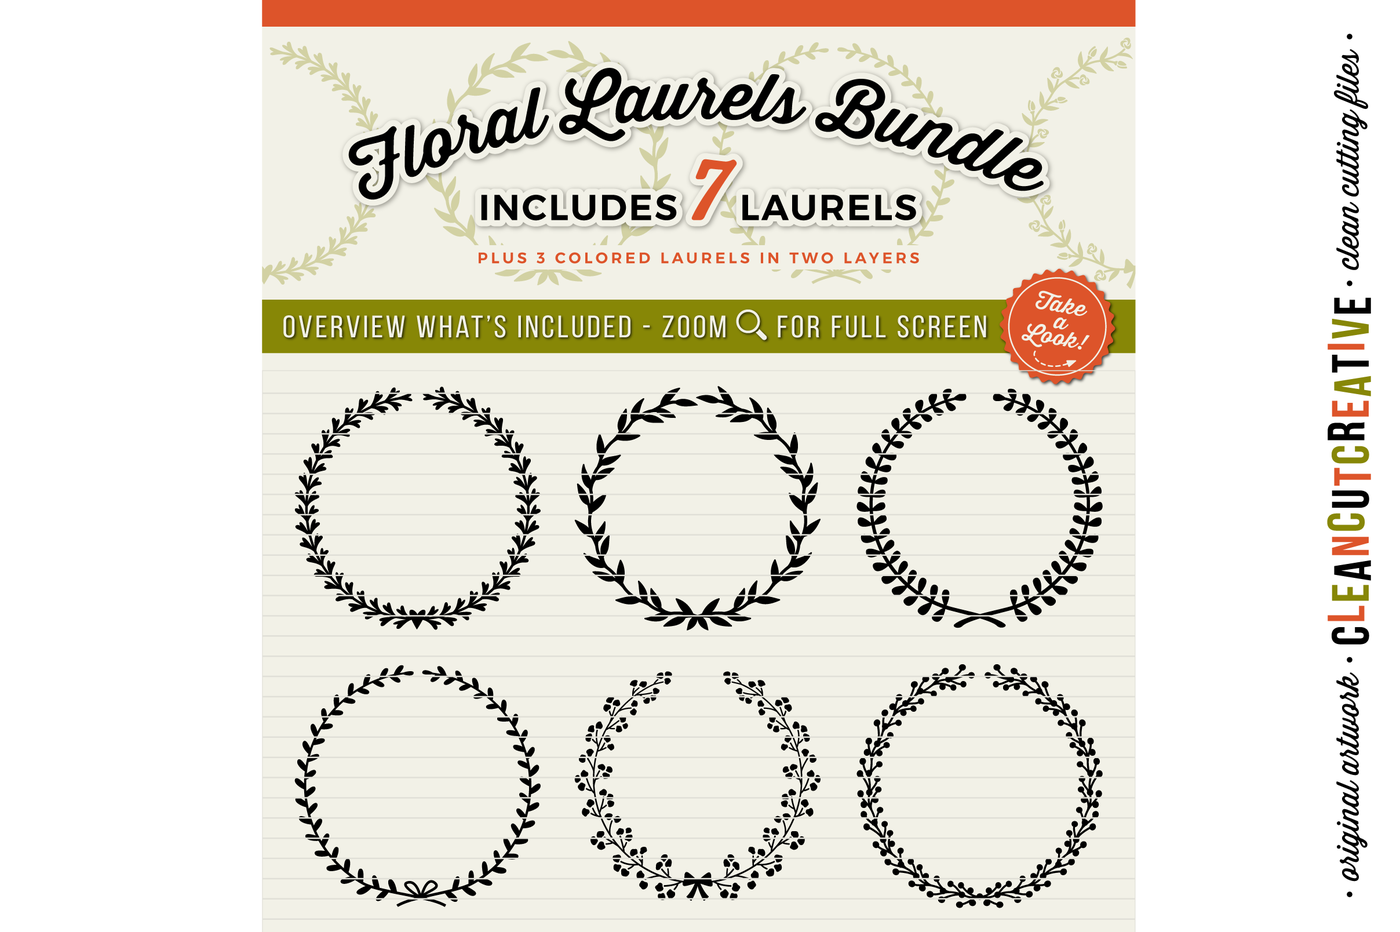 Wreath Frame Svg Bundle,Garland svg,Hand Drawn Wreath Garland svg clipart vector png dxf stencil cut file for Cameo silhouette cricut vinyl